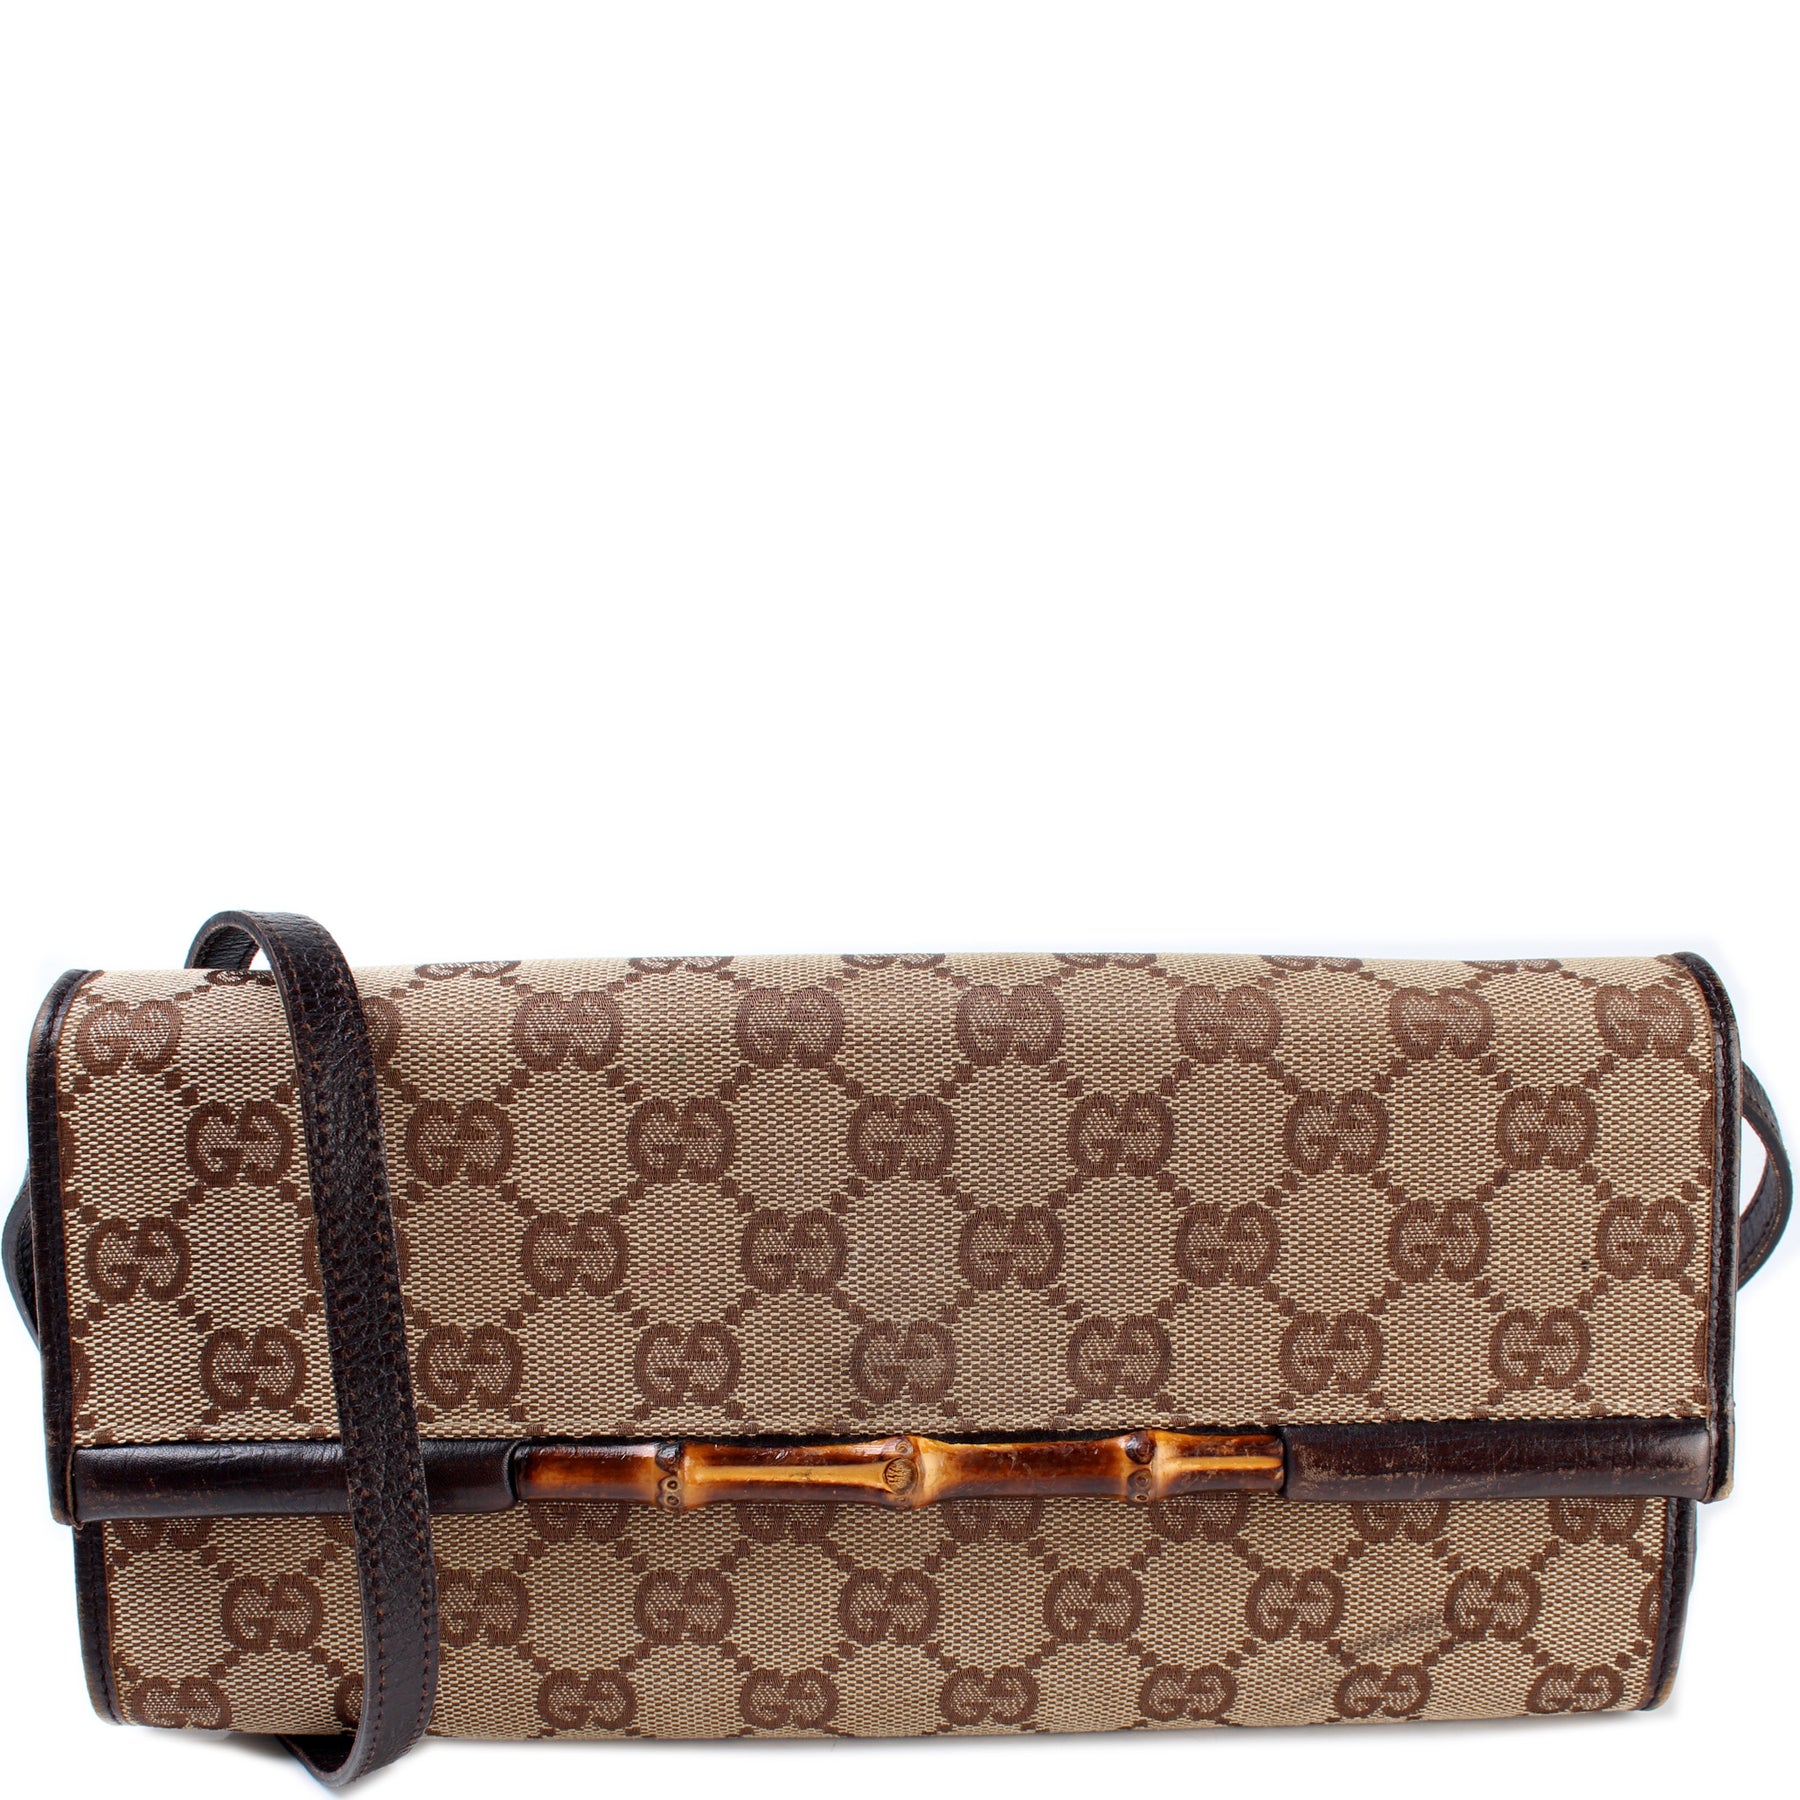 Gucci Authenticated Bamboo Clutch Bag